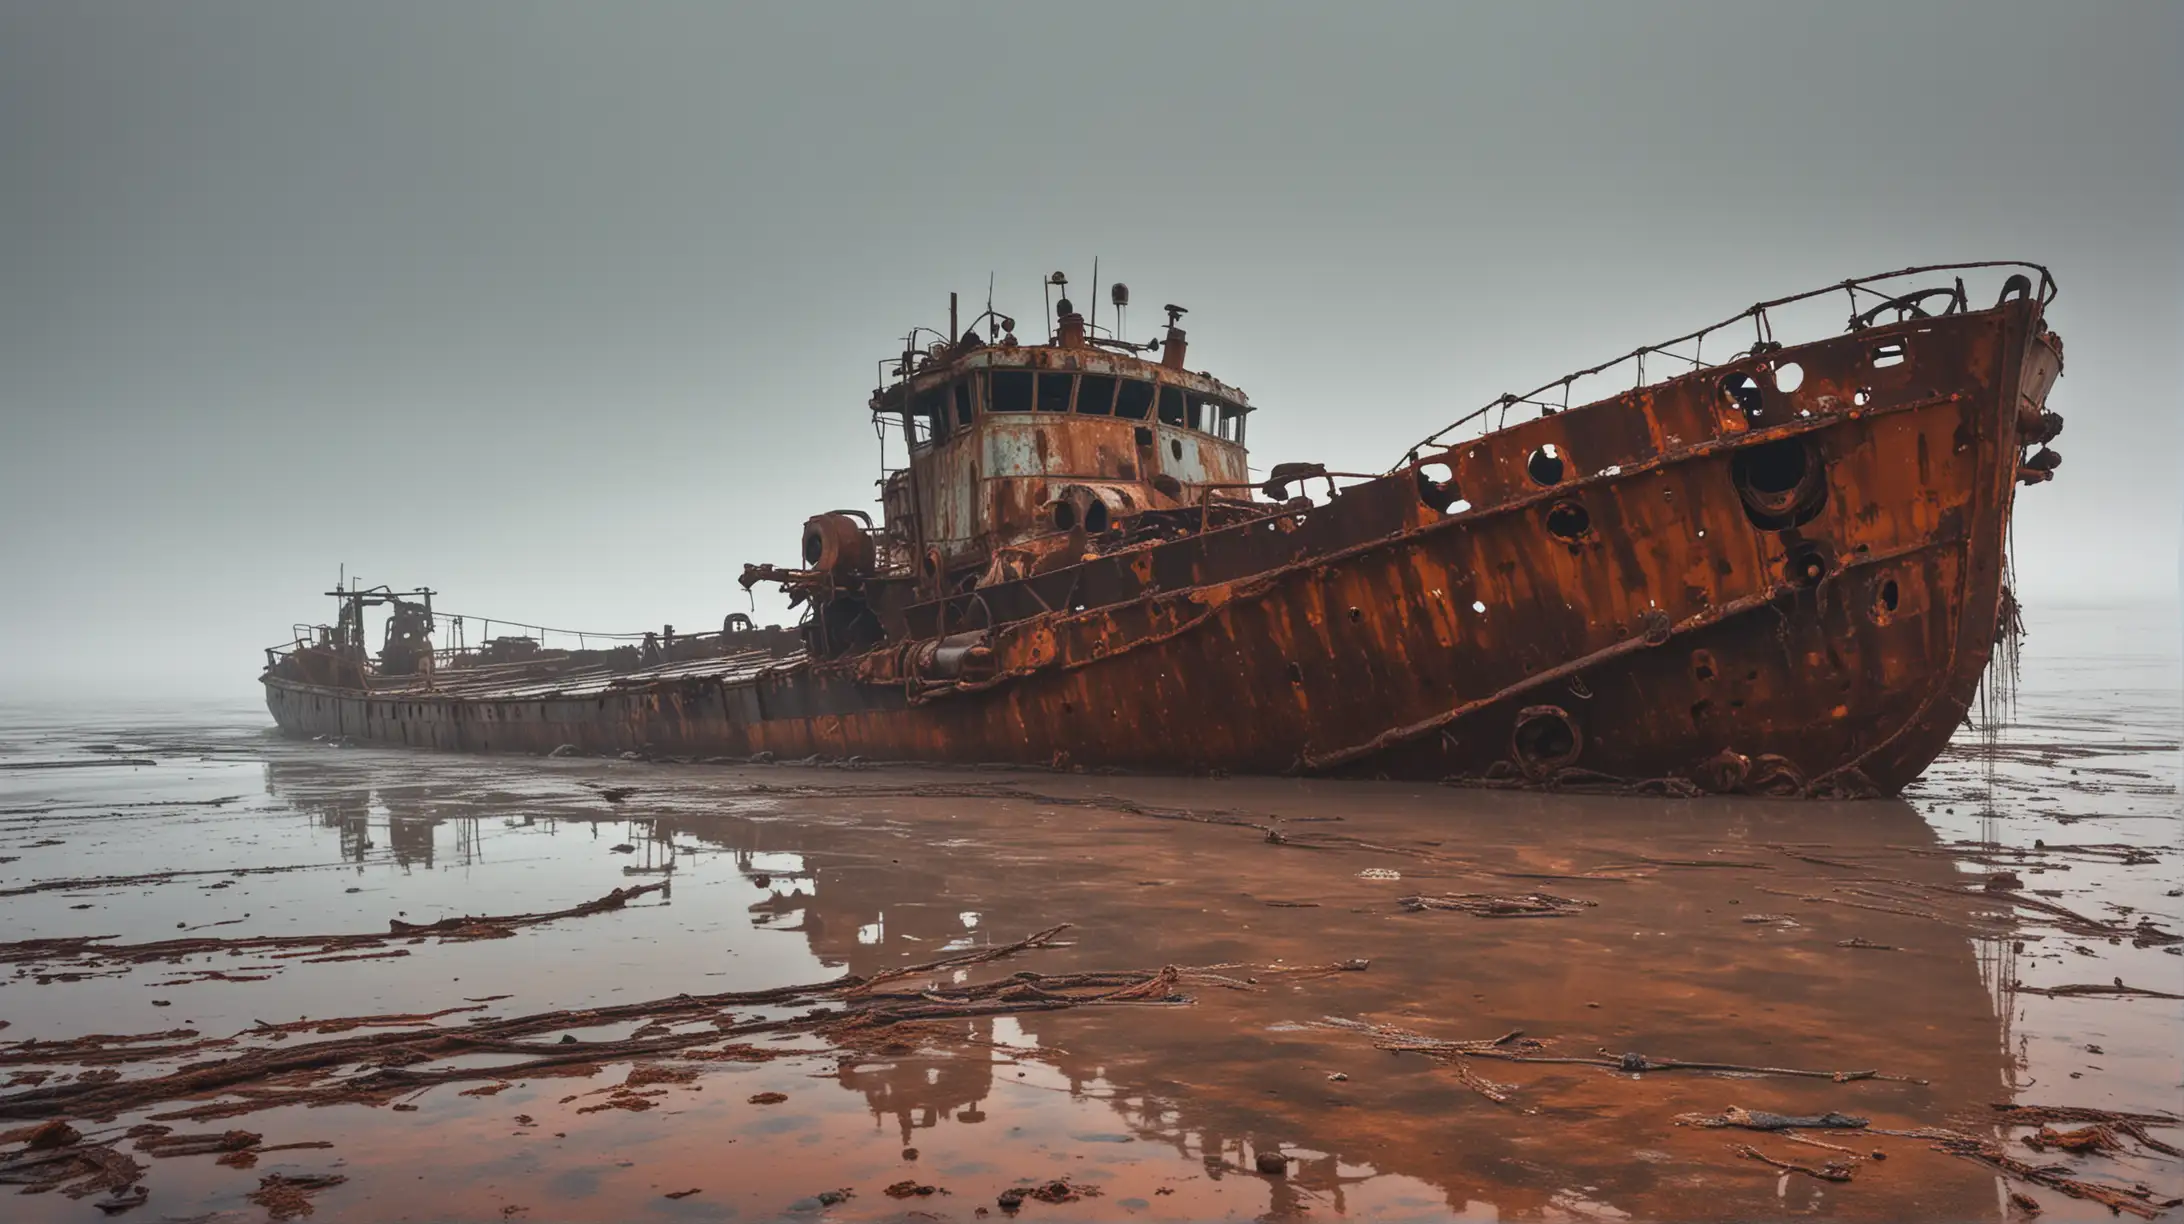 a rust-eaten wreckage of an old tanker, in a shallow gulf, rain and fog, psychodelic view